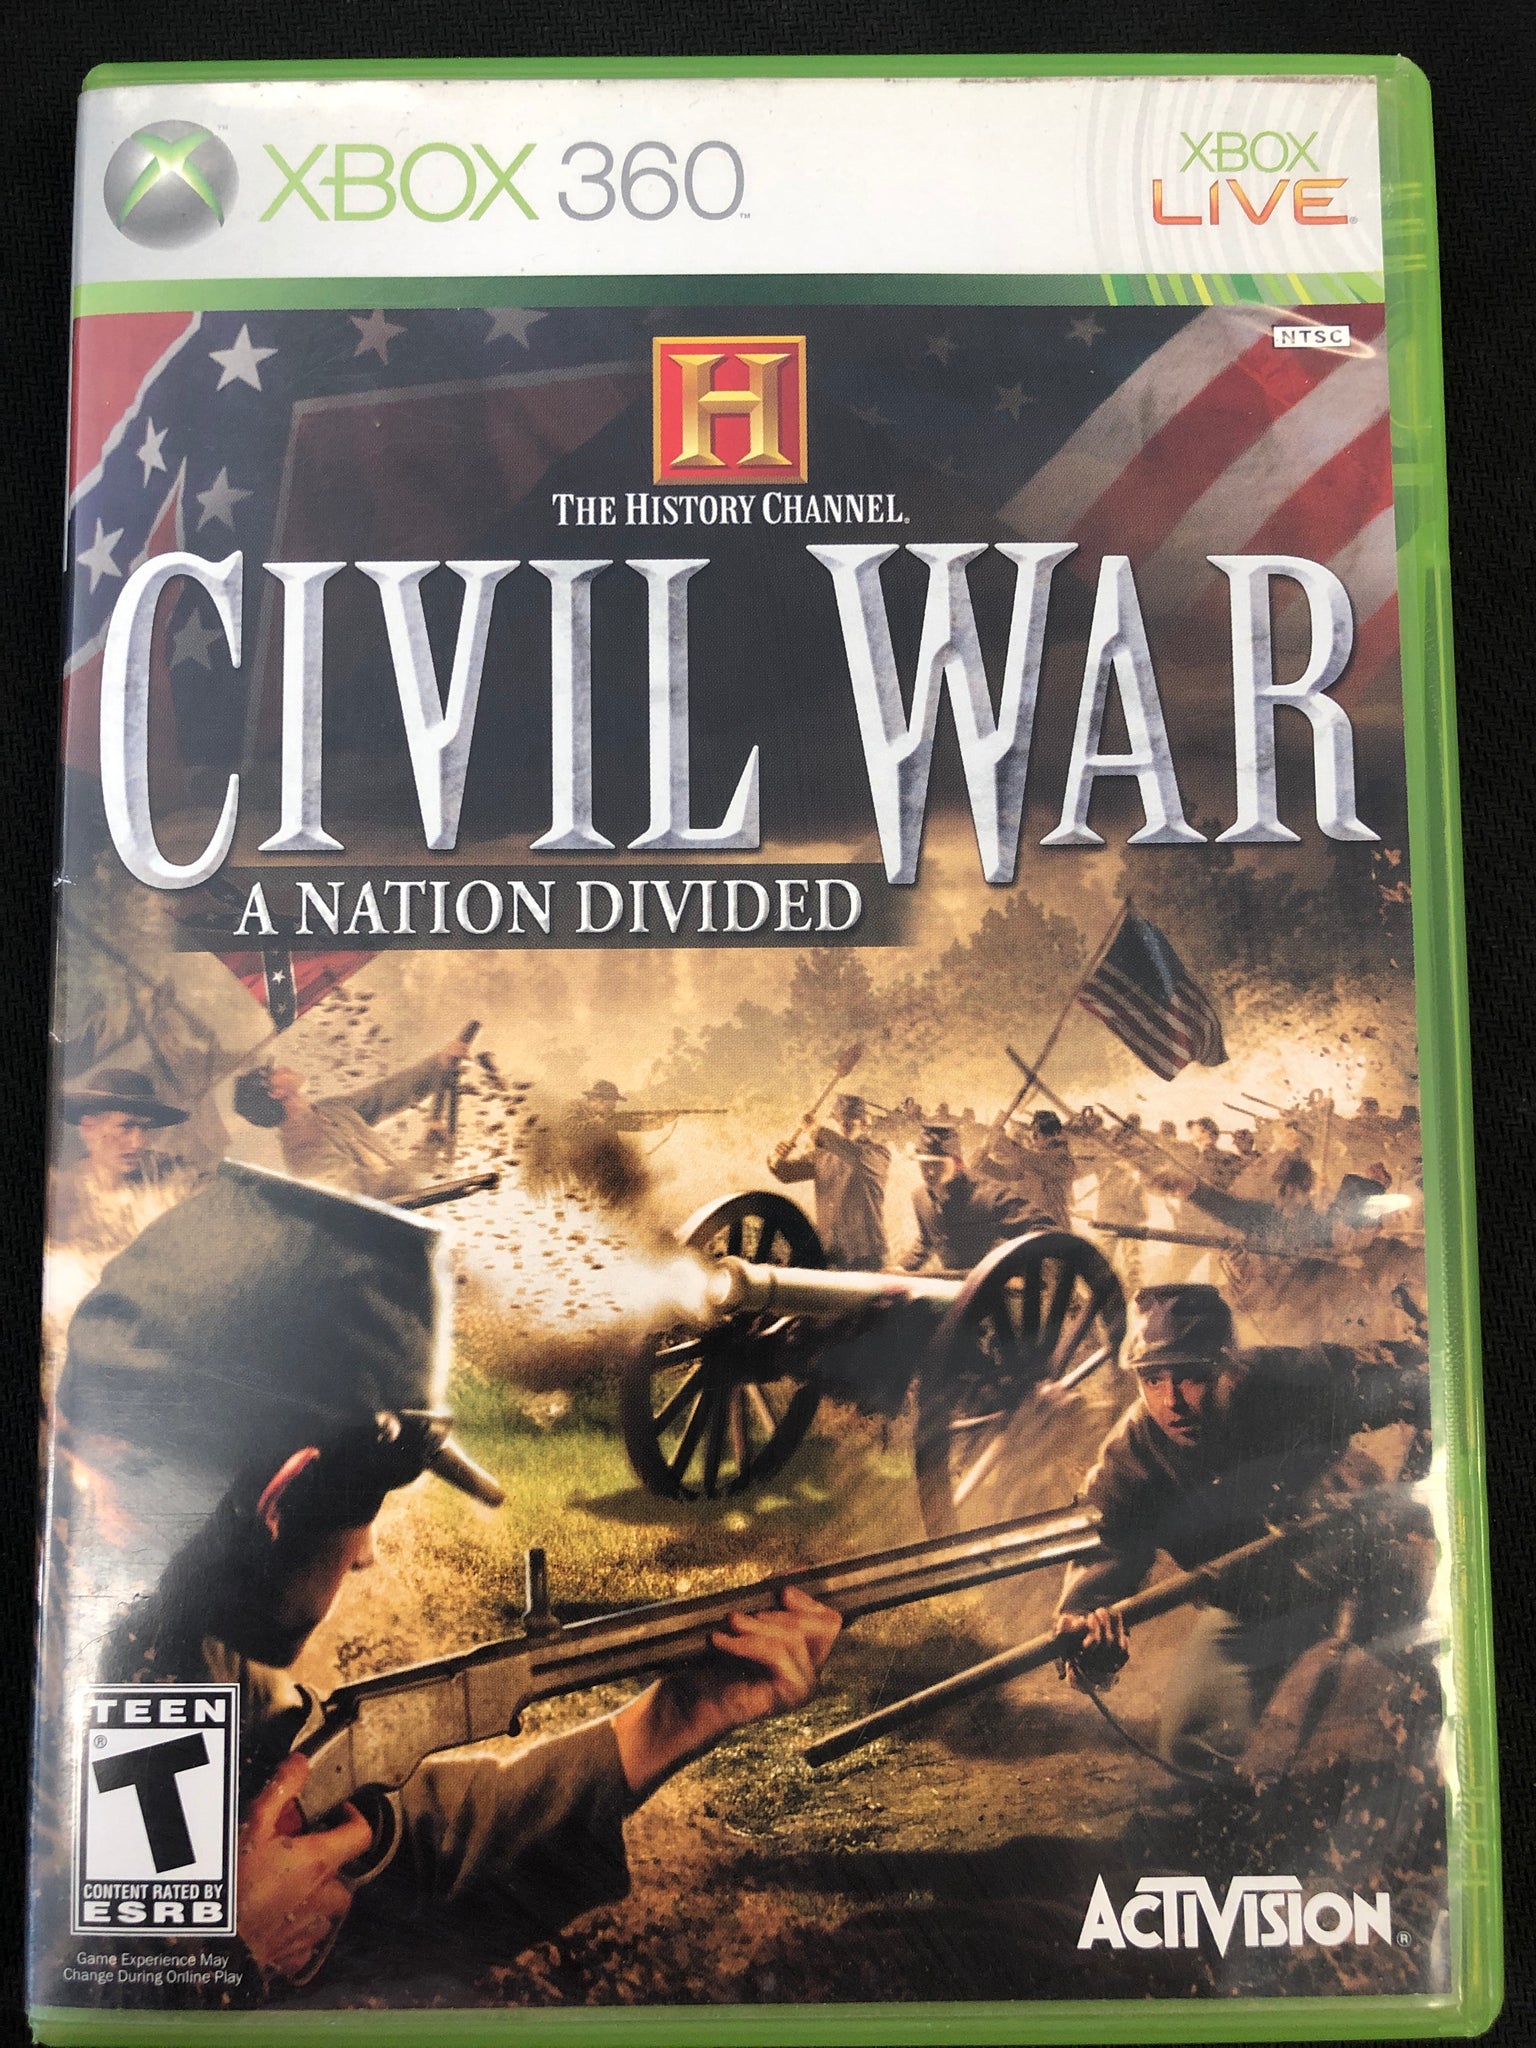 Xbox 360: History Channel Civil War A Nation Divided – Mero Games